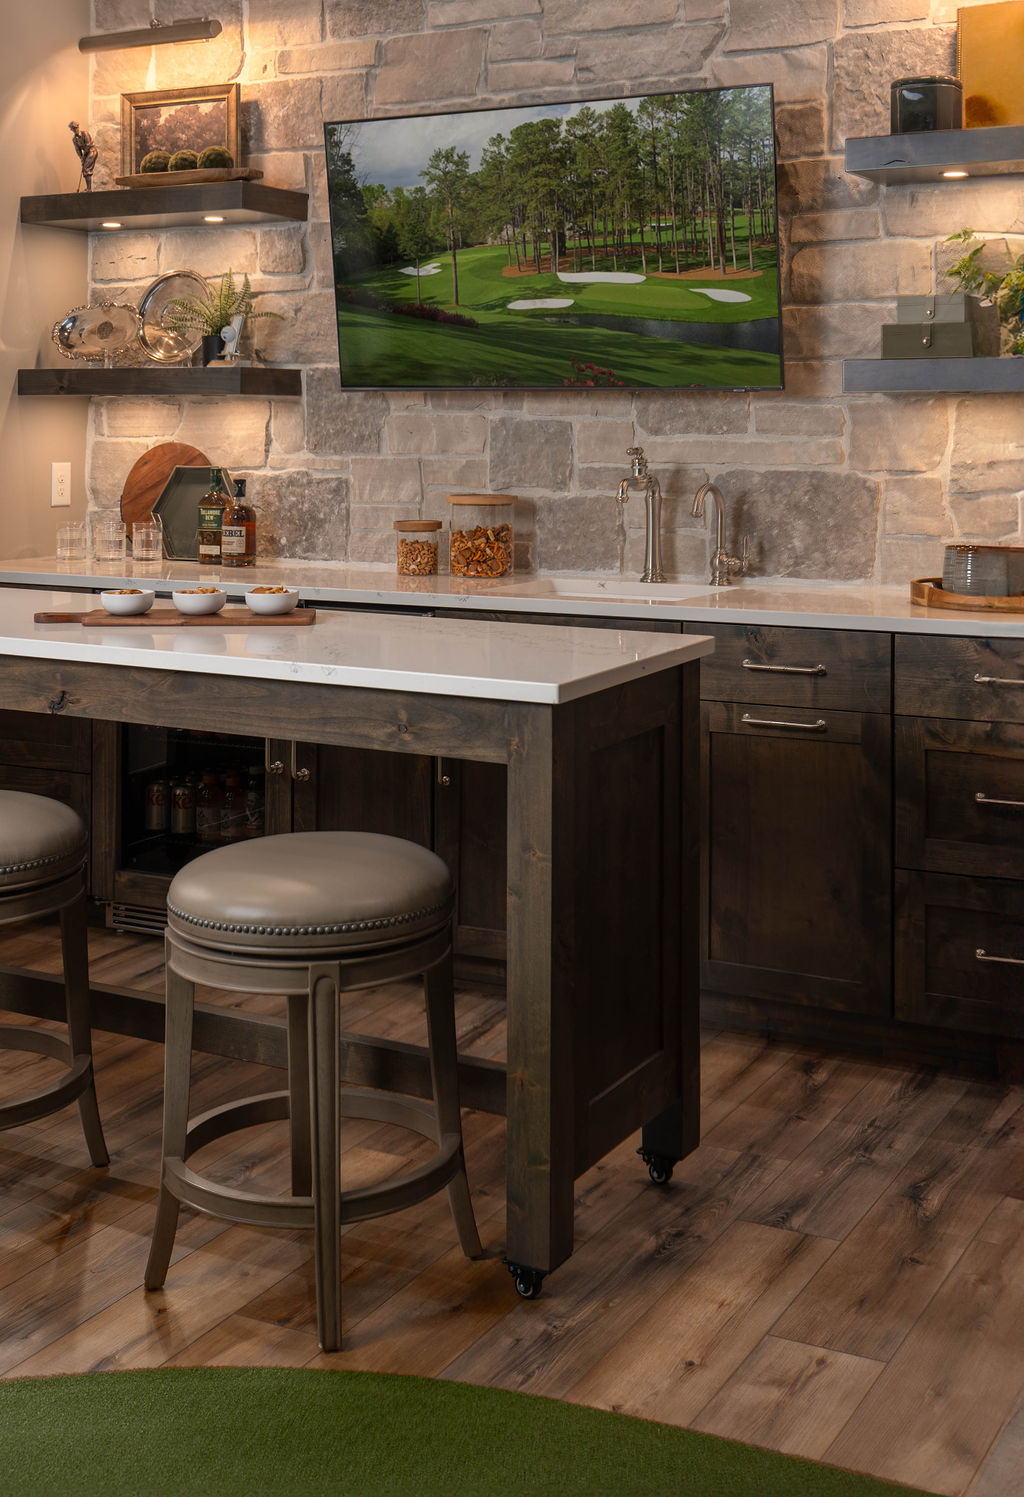 A modern kitchen interior with stone walls, wooden cabinetry, bar stools, and a golf simulator.